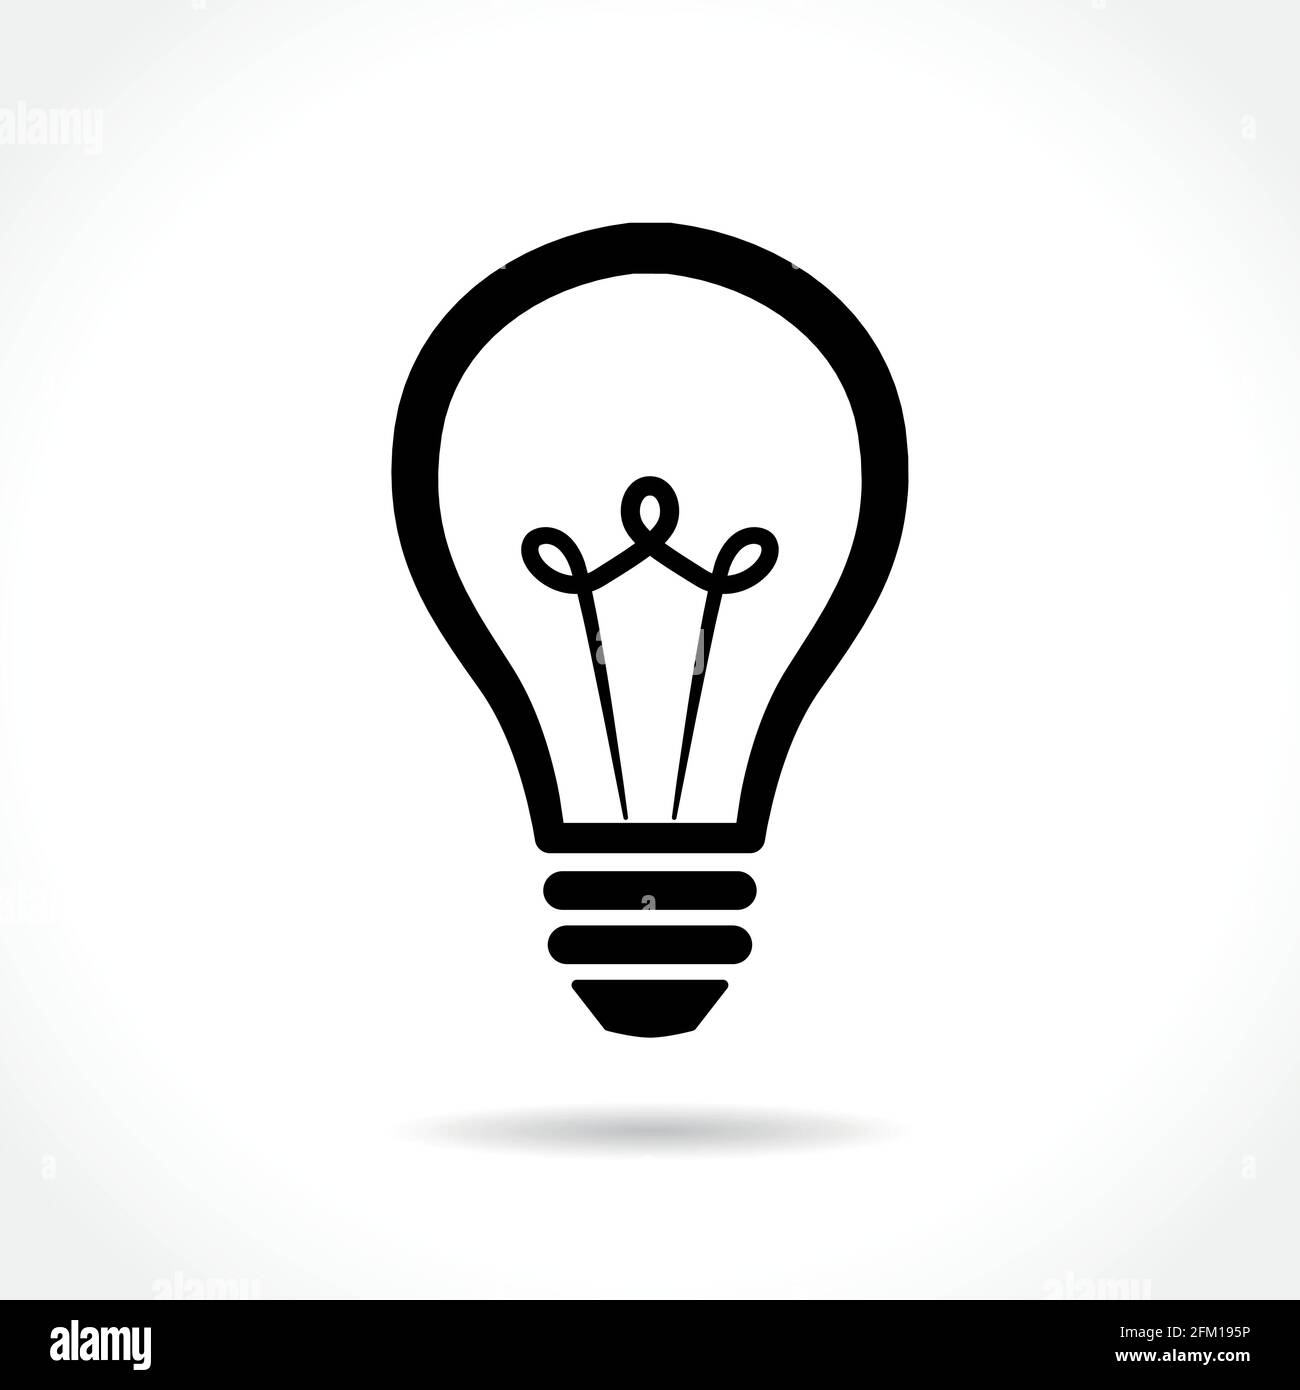 Illustration of bulb icon on white background Stock Vector